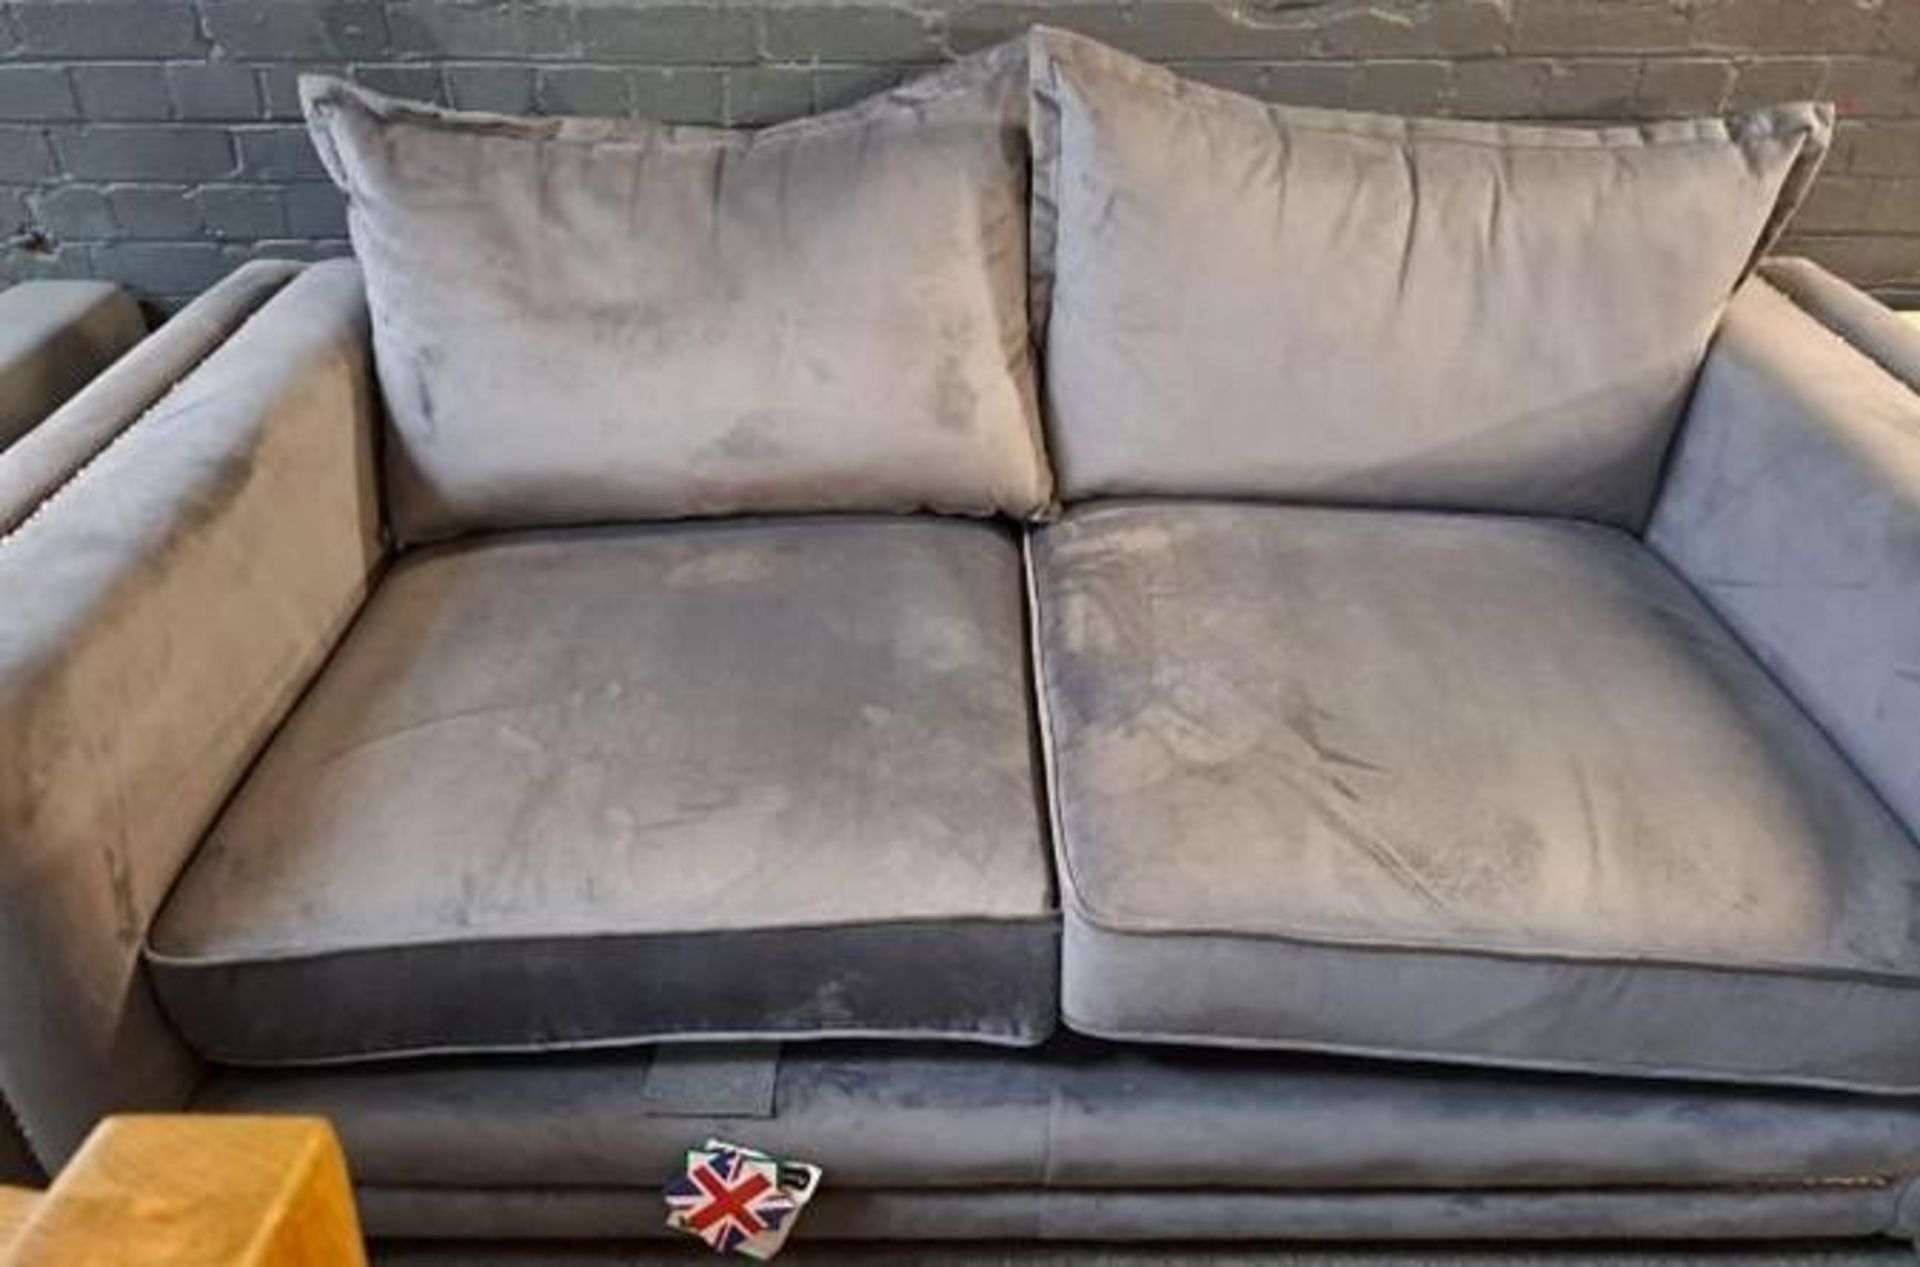 *EX DISPLAY* Laurence Llewelyn Bowen large 2 seater sofa with hand studding.